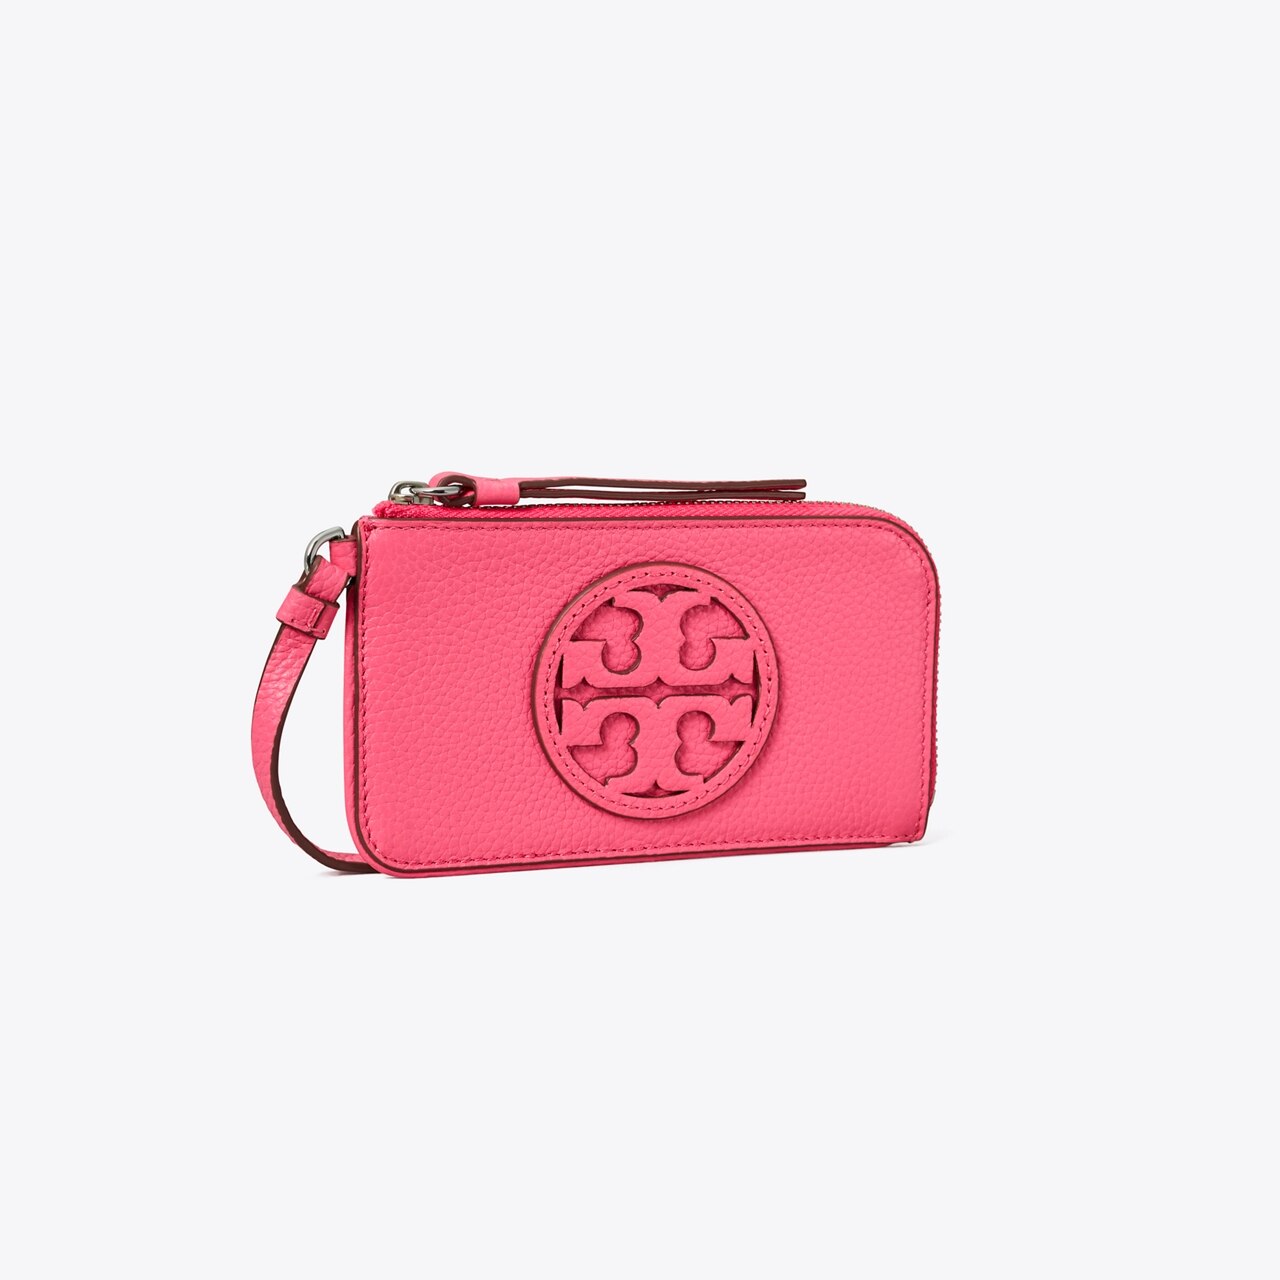 Tory Burch Robinson Small Zip Tote in Pink